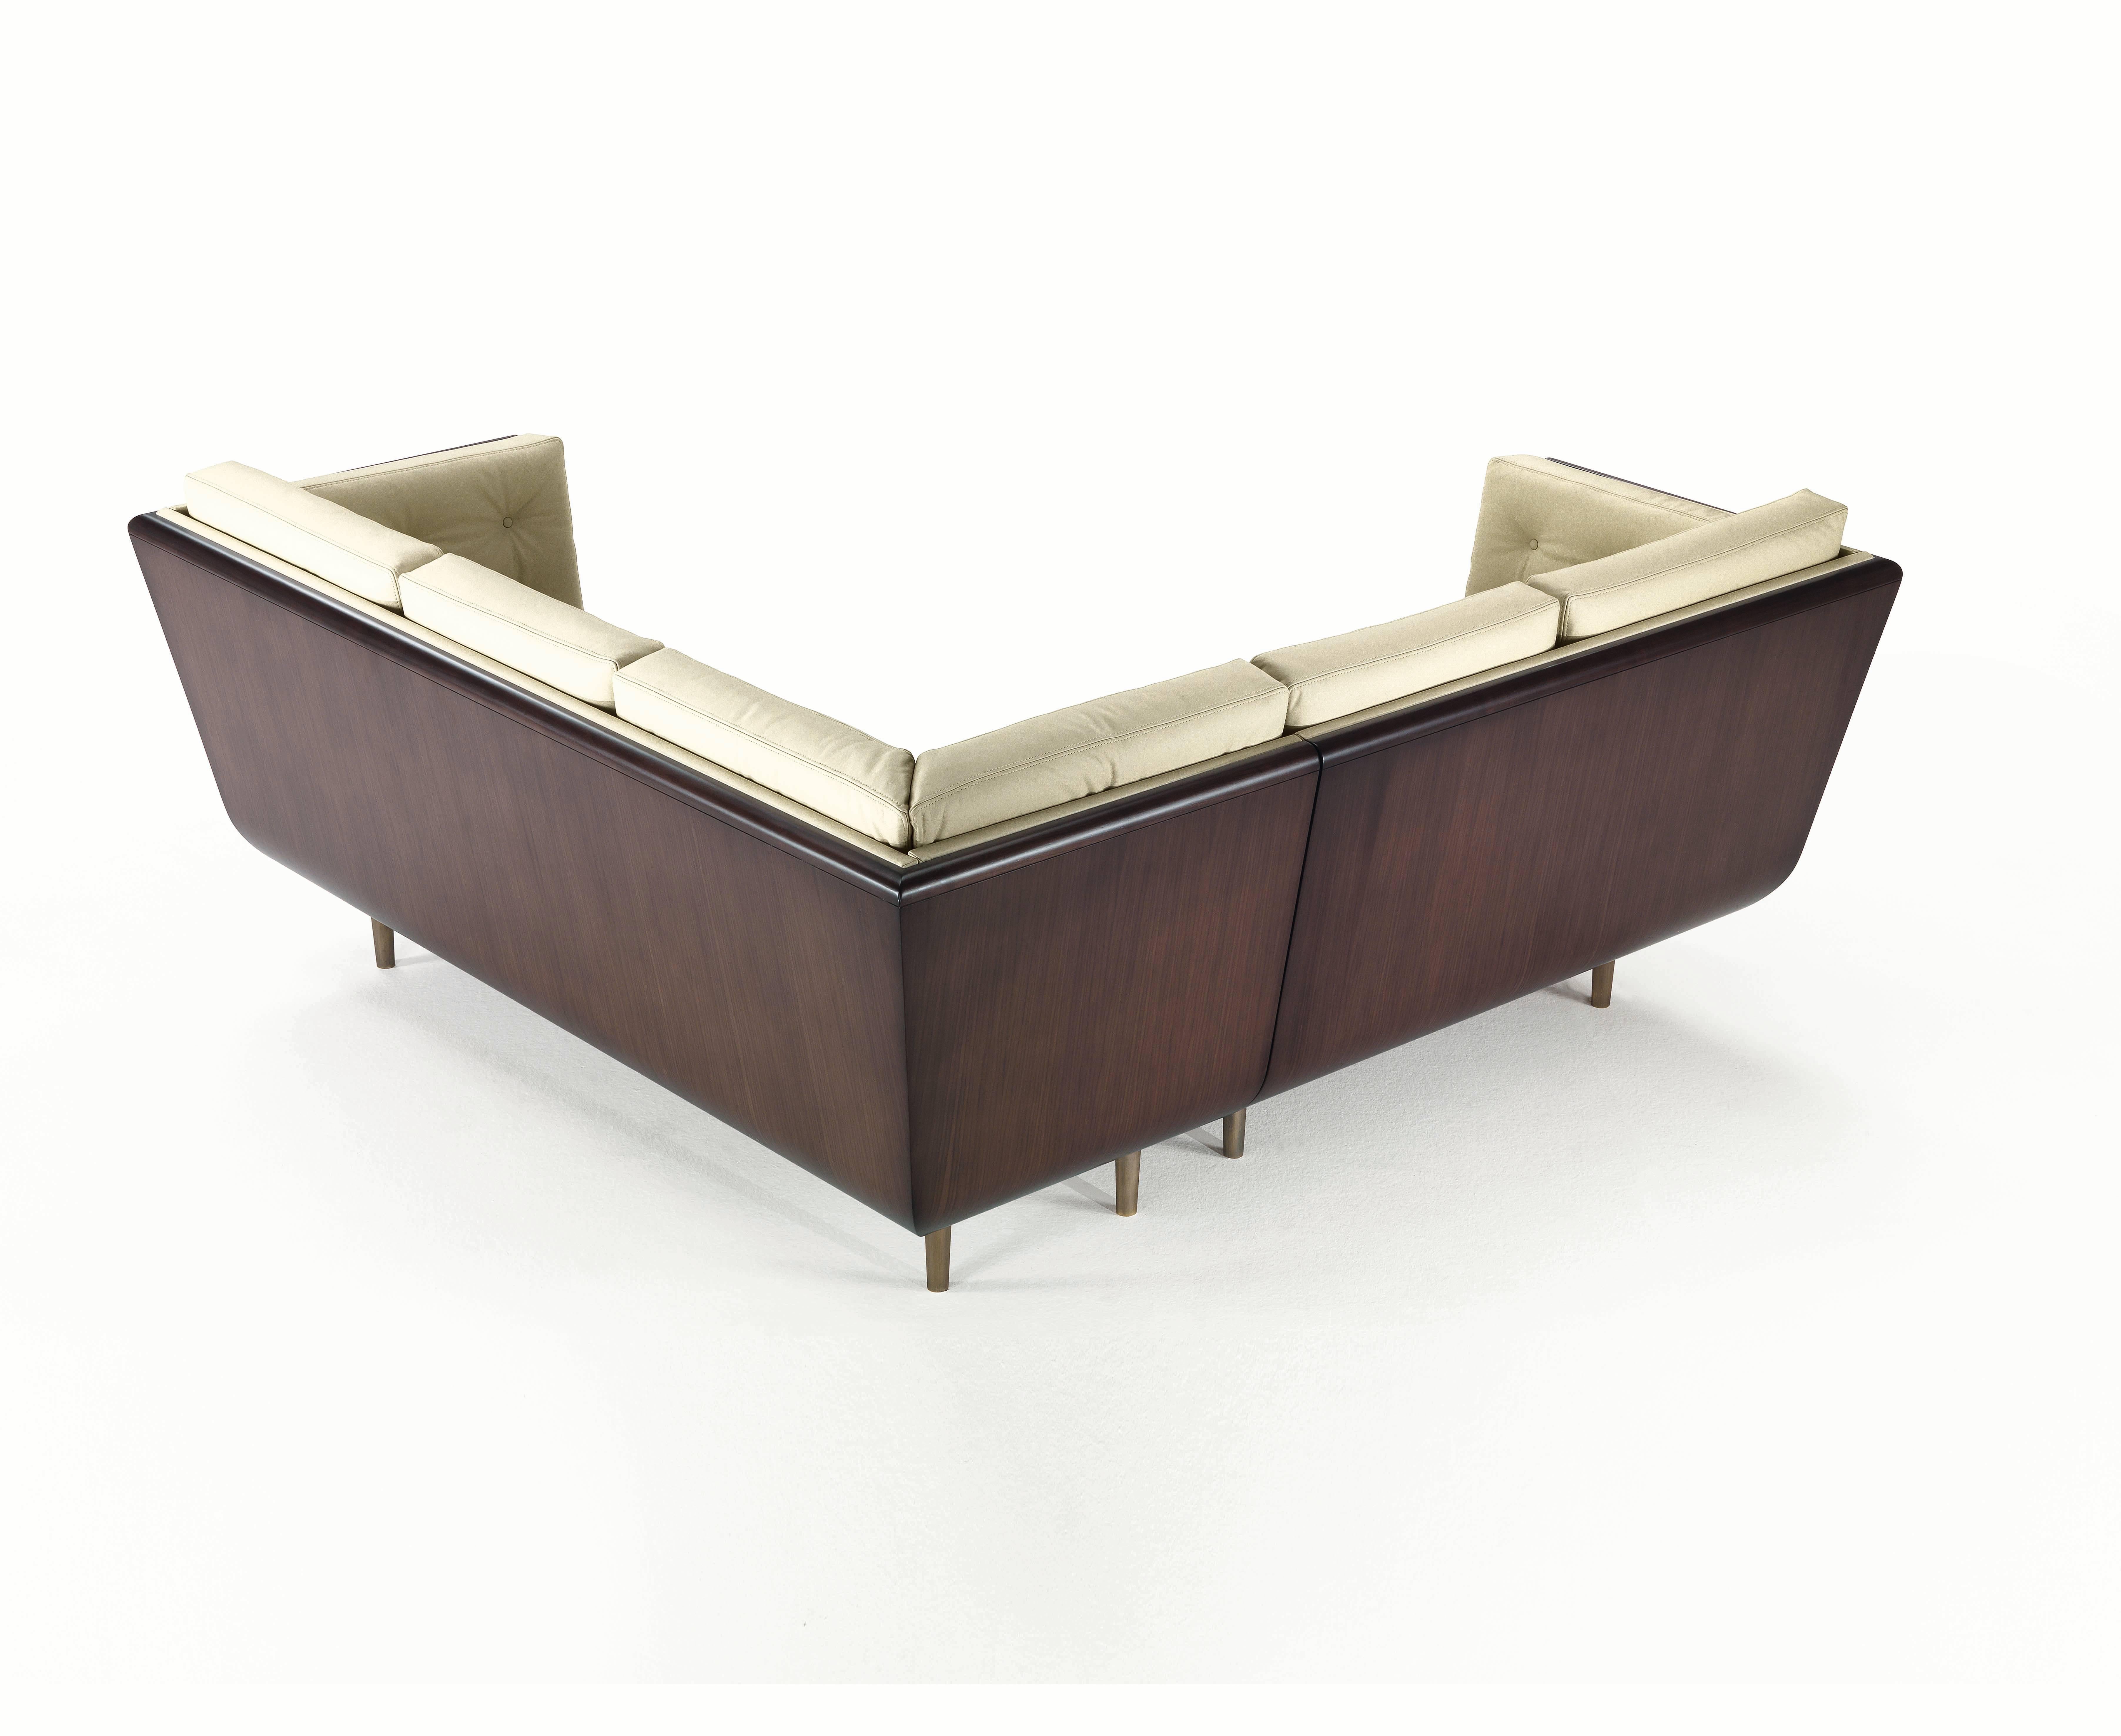 L-sofa in black American walnut stained dark brown in matte finish, seat and back cushion with buttoned detail, padded with expanded polyurethane and Dacron, upholstered with Nuvola Camelia leather, nr. 6 seats. Bronze tapered feet.